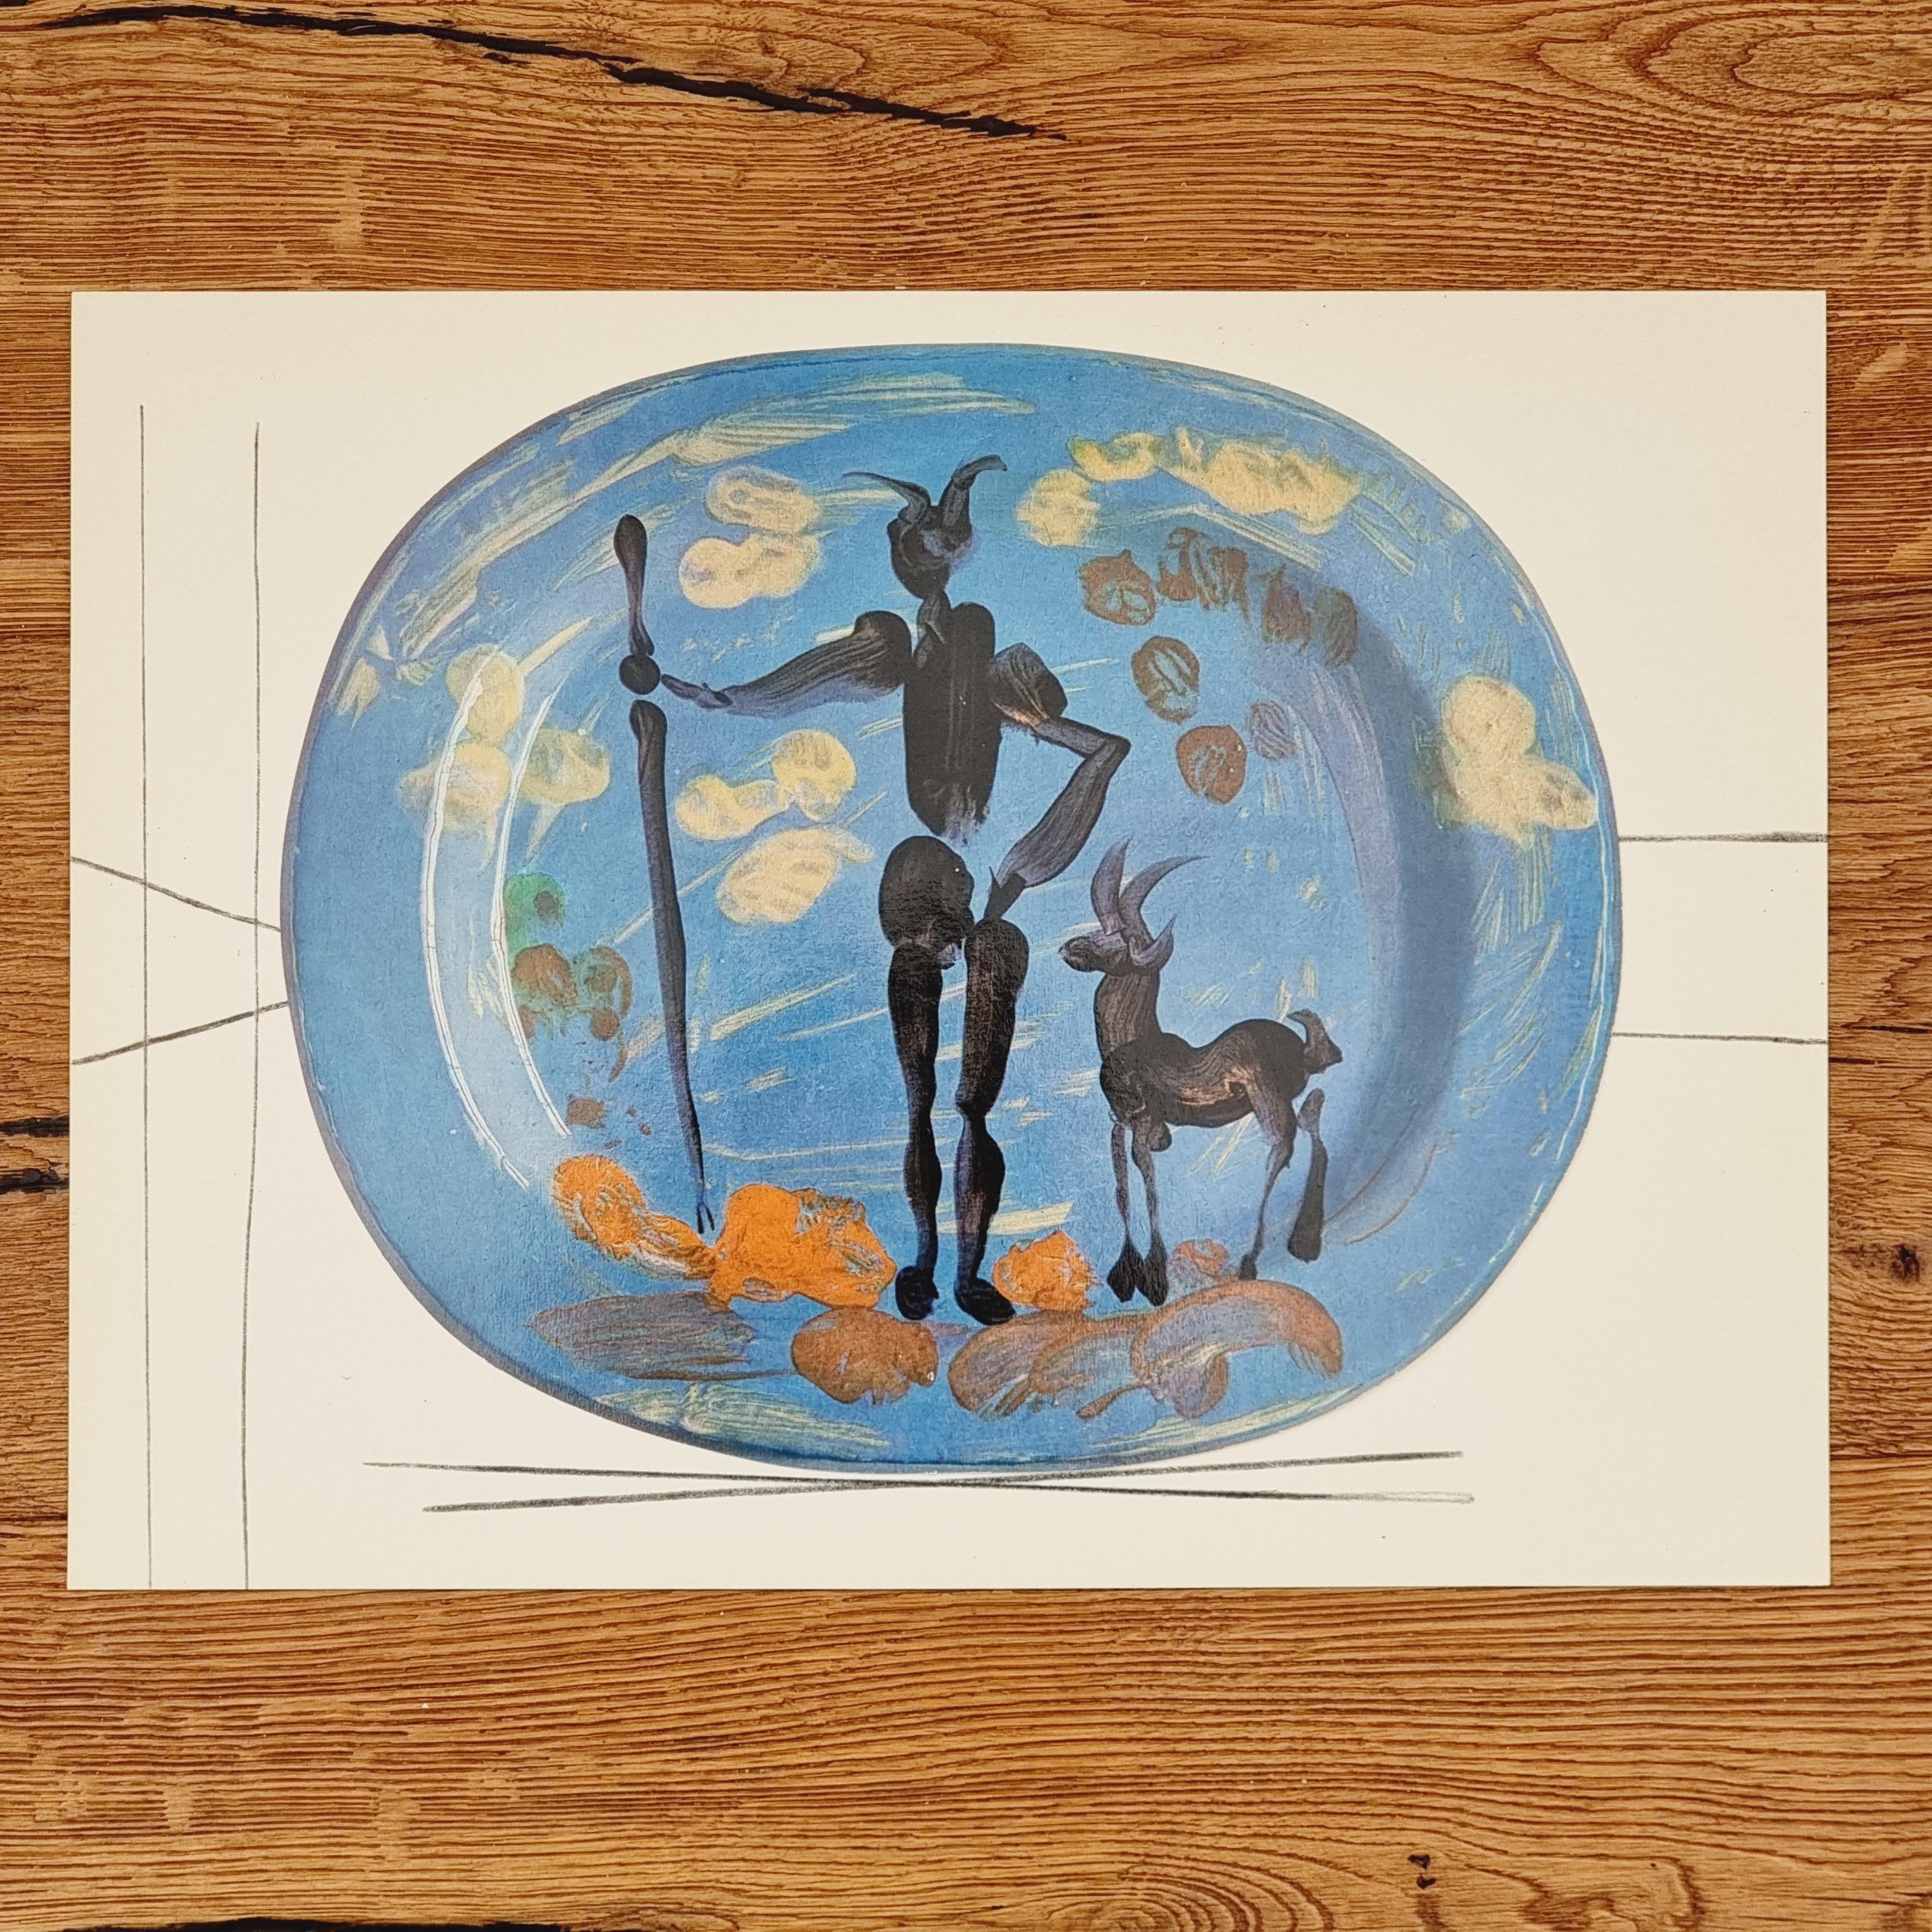 An exquisite shiny polychrome print of Picasso Vallauris ceramic plate depicting shepard and goat. The color print is attached to a thick, high quality paper with decorative lines. 

The print is originally from a Limited Edition Art Folio